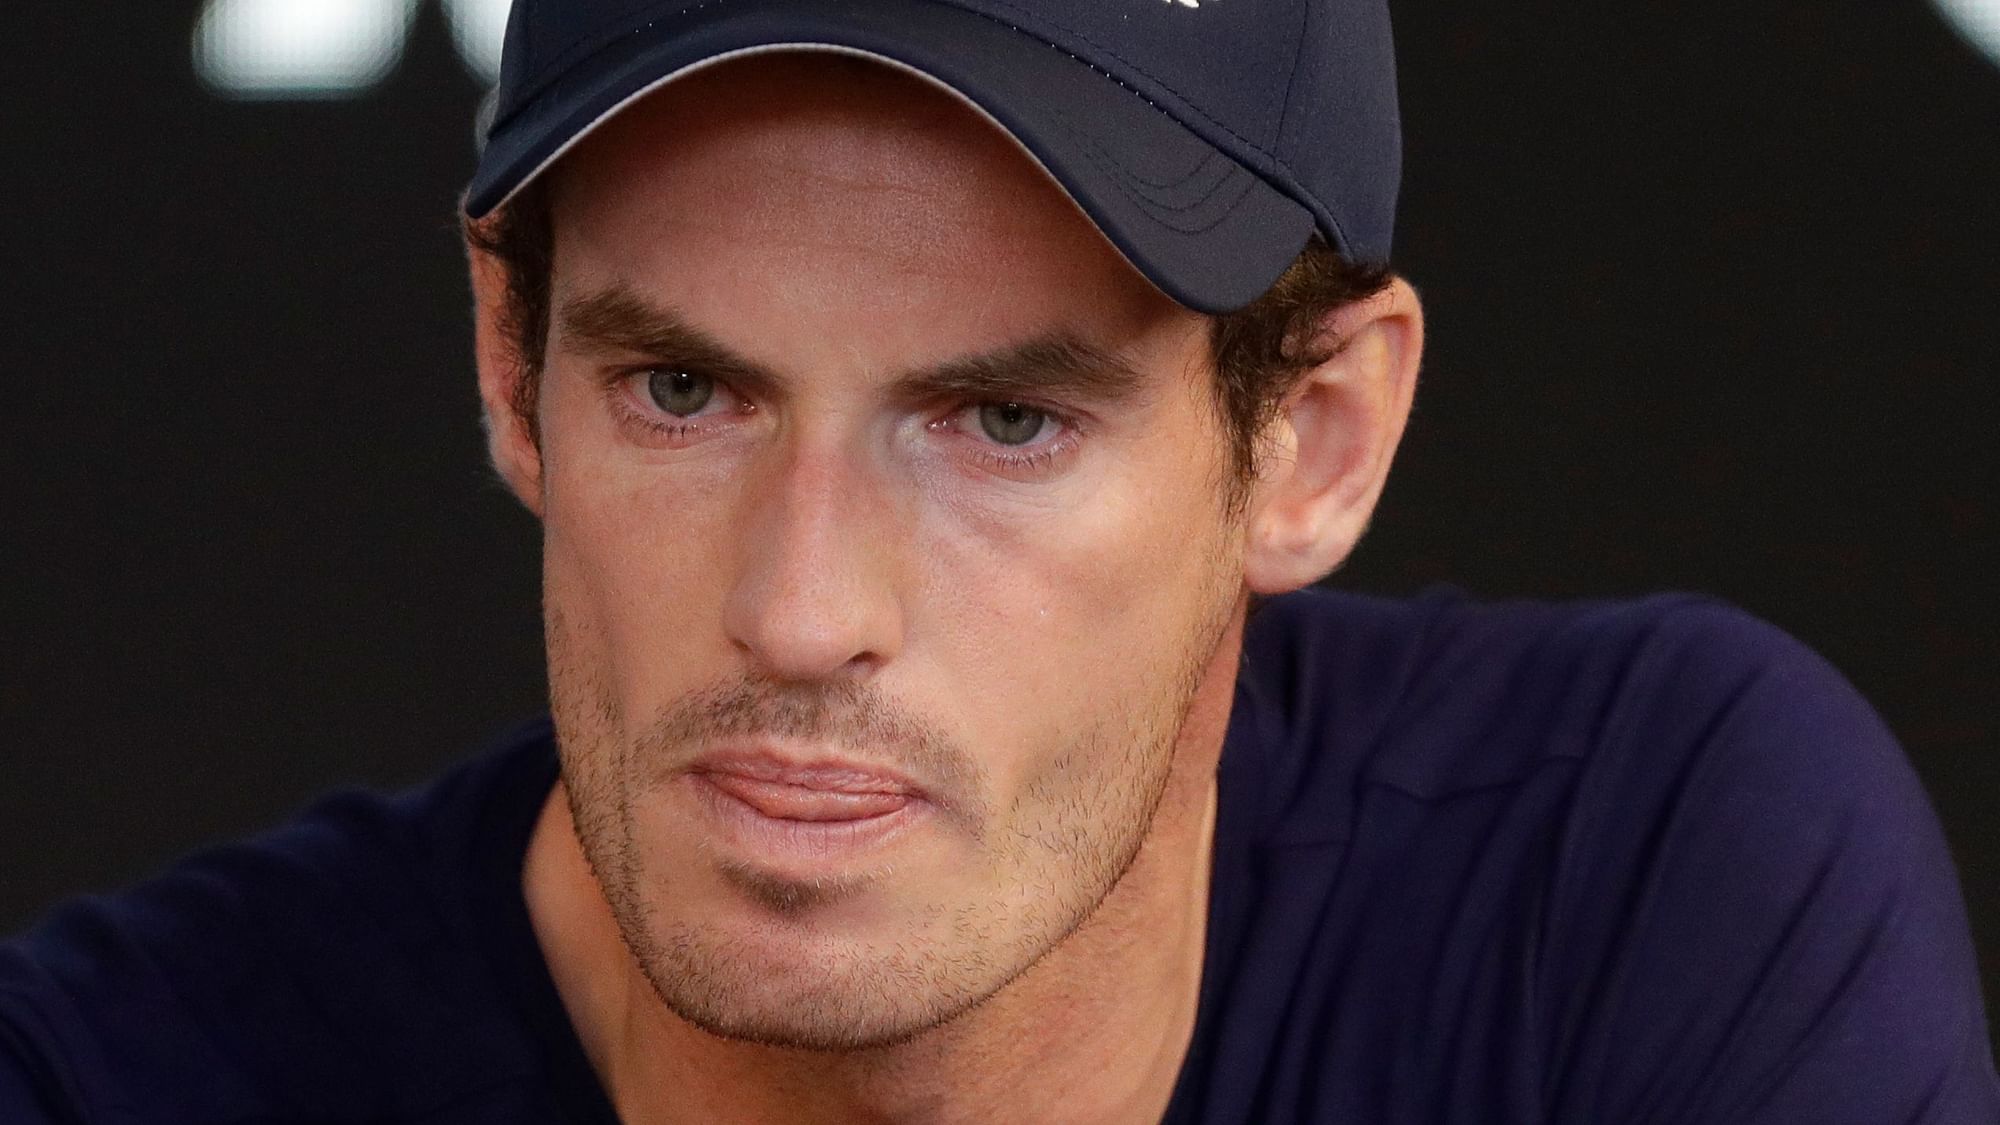 Andy Murray revealed that the Australian Open could be his last tournament before taking a forced retirement.